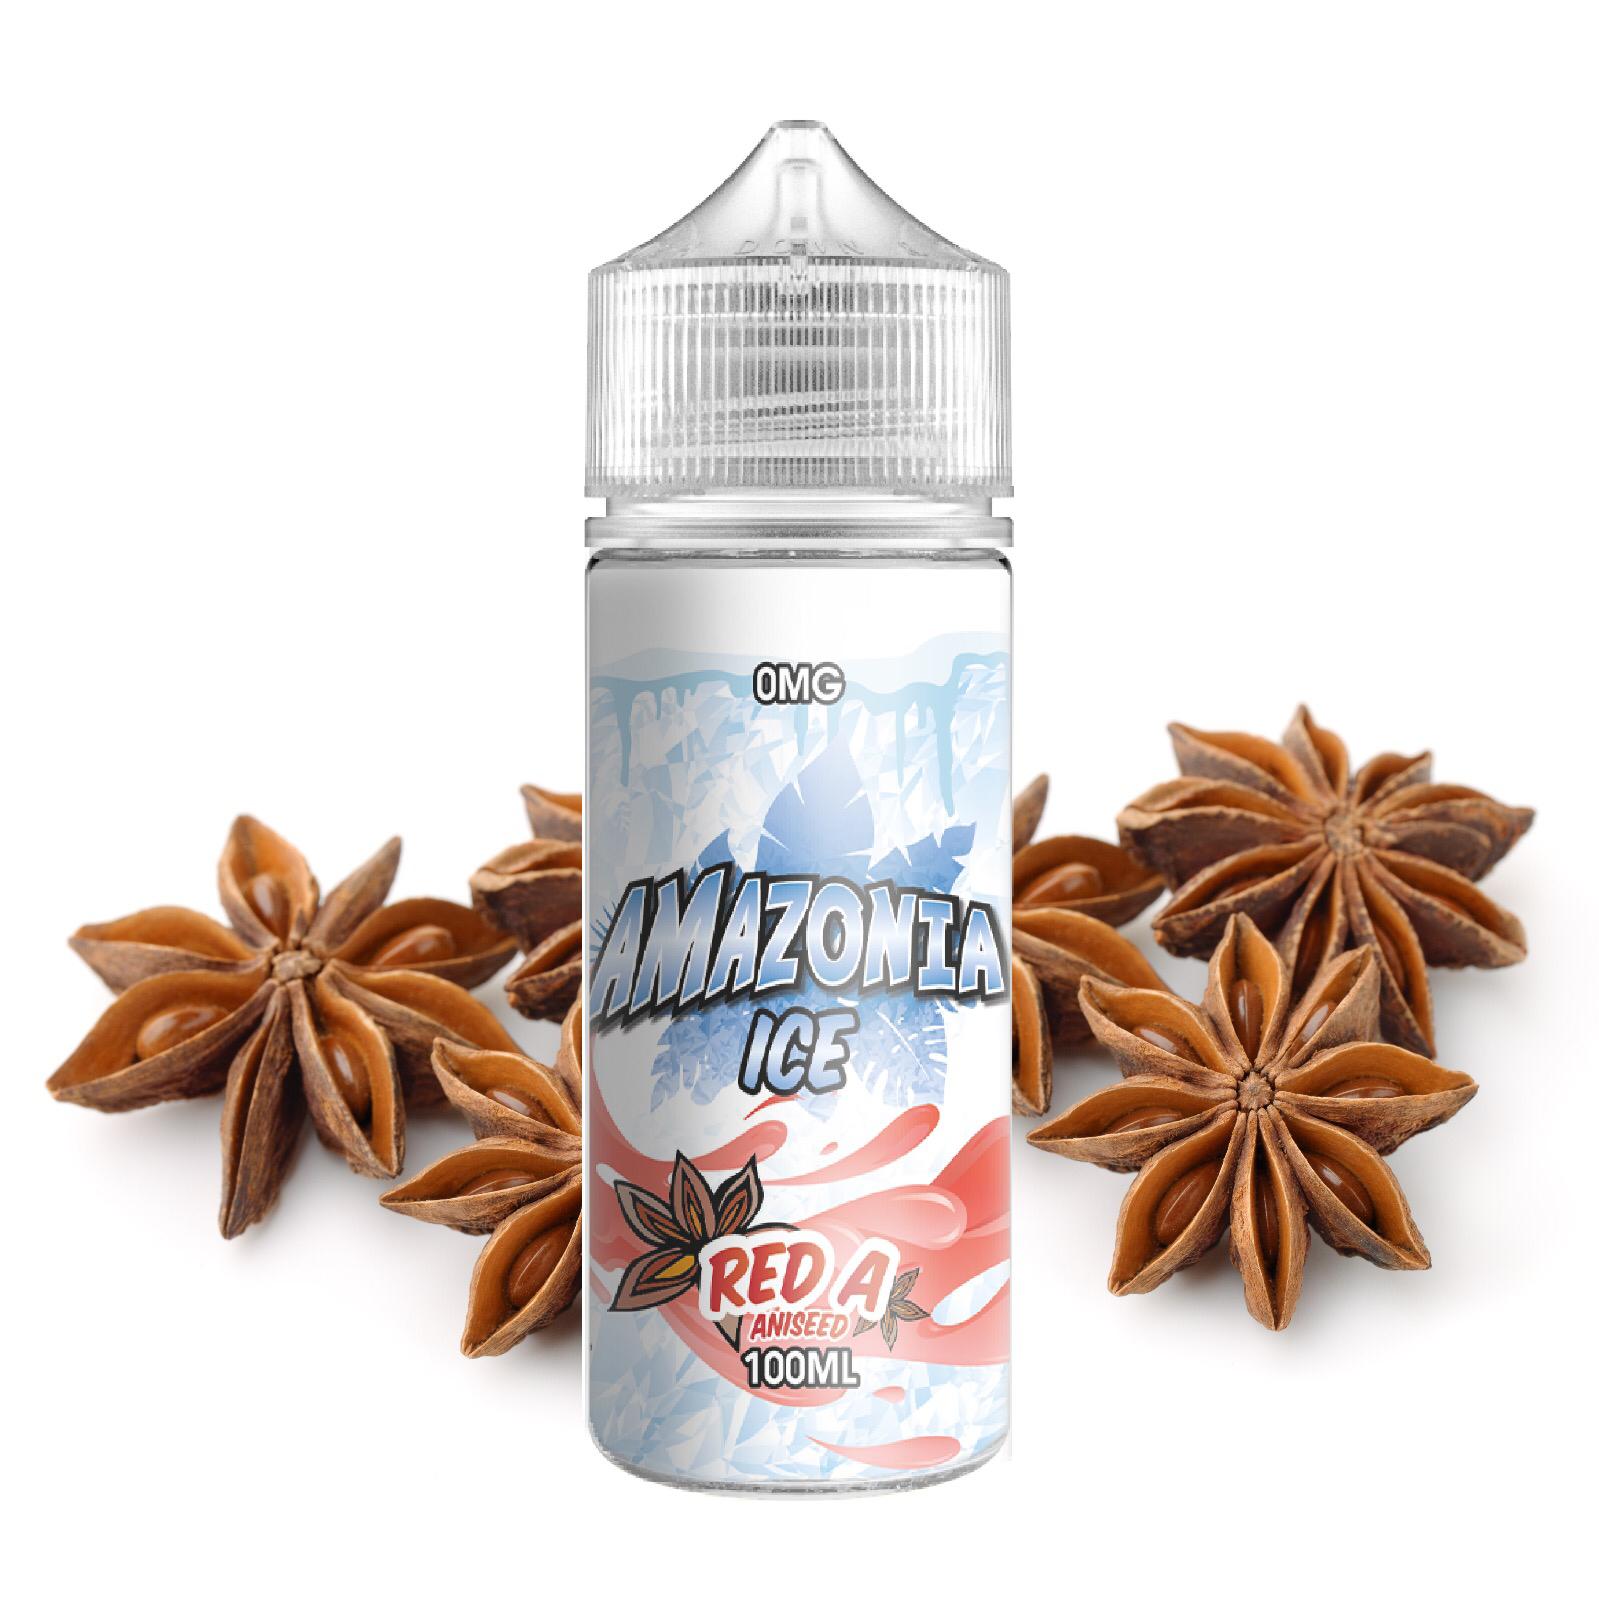 Red A by Amazonia ICE 100ml